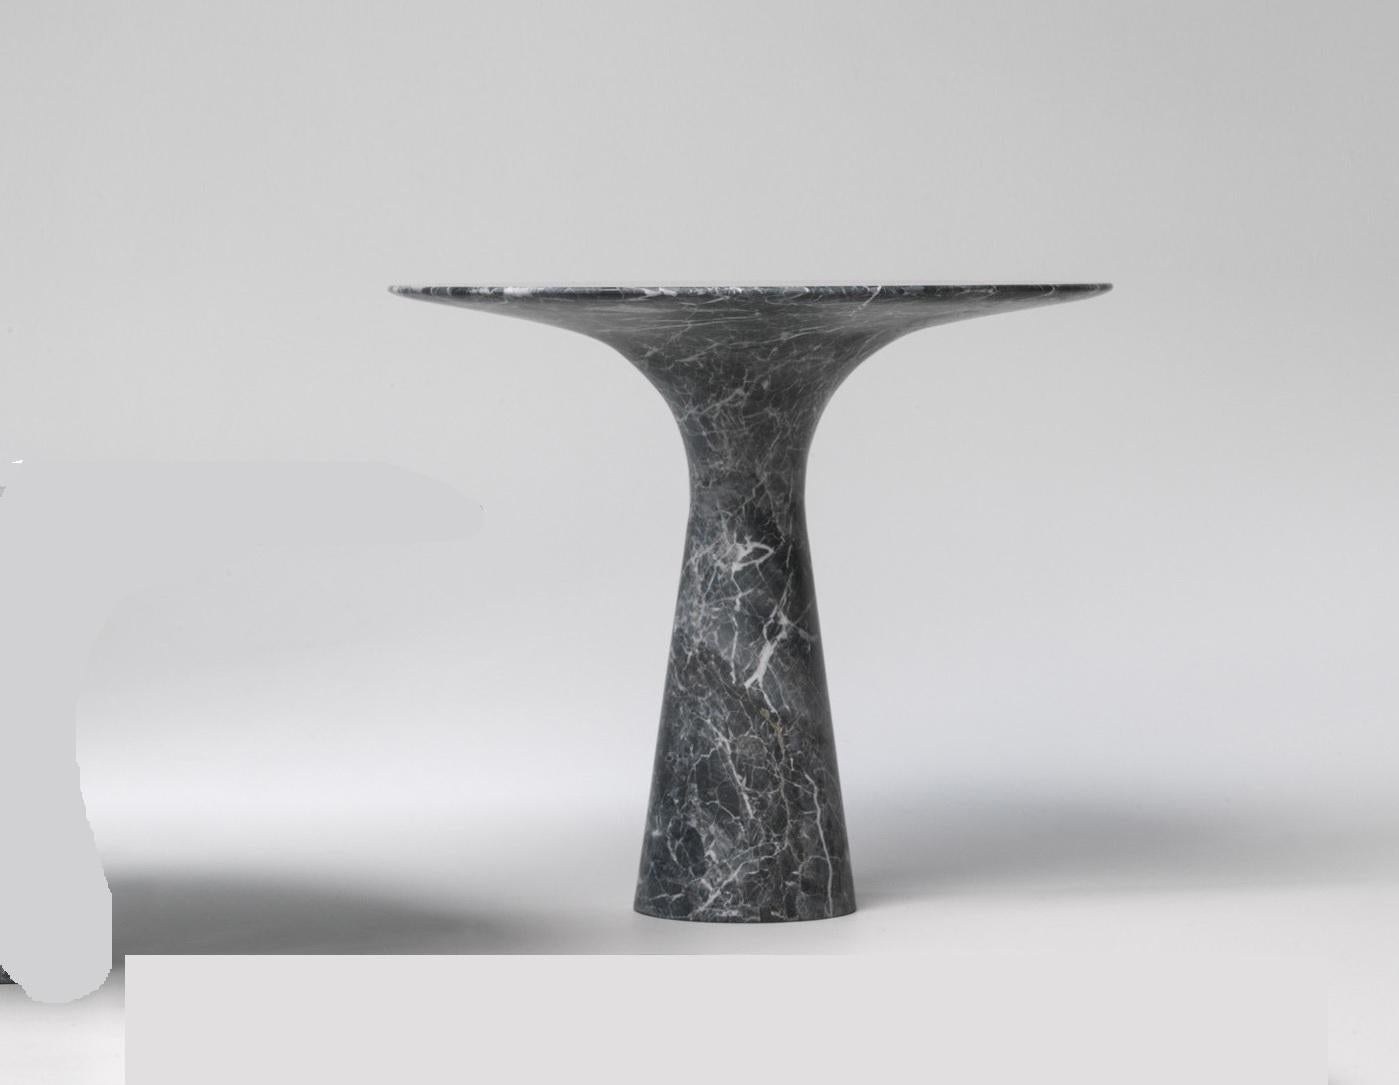 Refined Contemporary marble 03 grey Saint Laurent marble cake stand
Signed by Leo Aerts.
Dimensions: diameter 26 x height 22.5 cm 
Material: grey saint laurent marble
Technique: polished, carved. 
Available in marble: kyknos, bianco